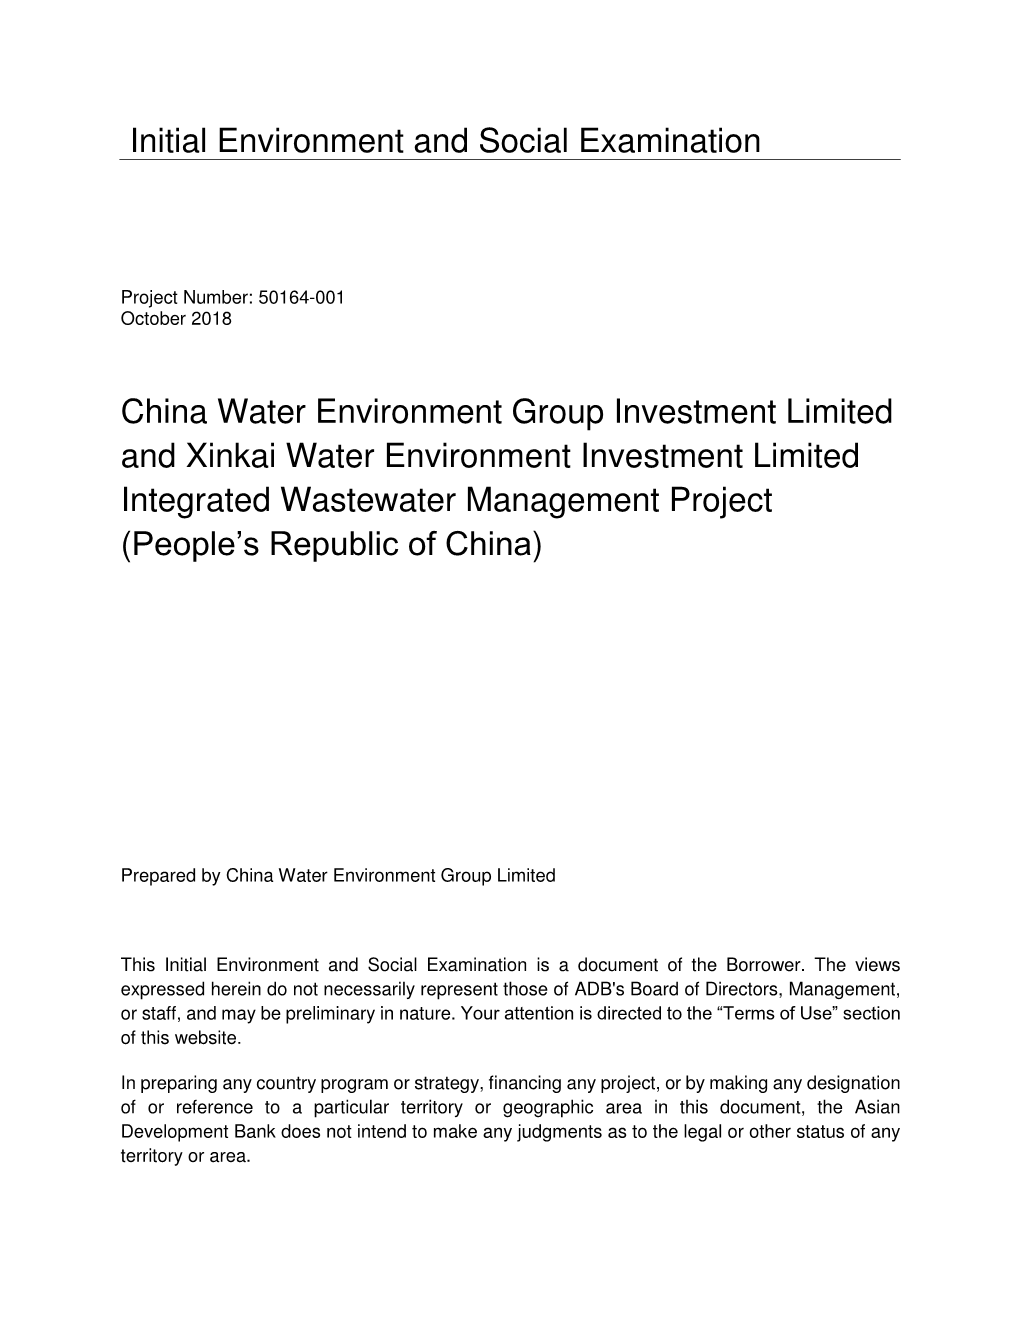 50164-001: Integrated Wastewater Management Project